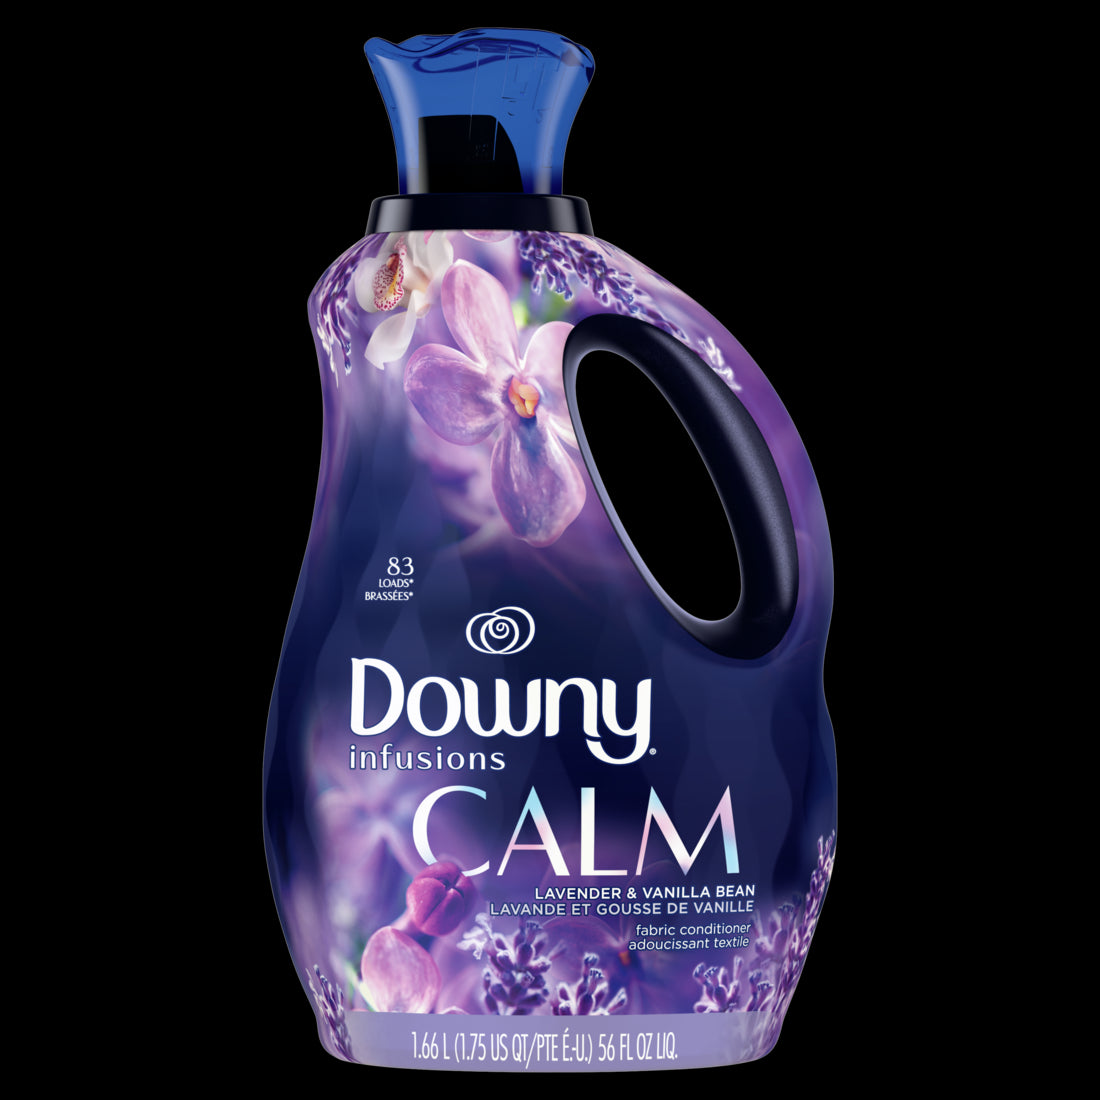 Downy CALM Infusions Laundry Fabric Softener Liquid Soothing Lavender and Vanilla Bean - 56oz/4pk